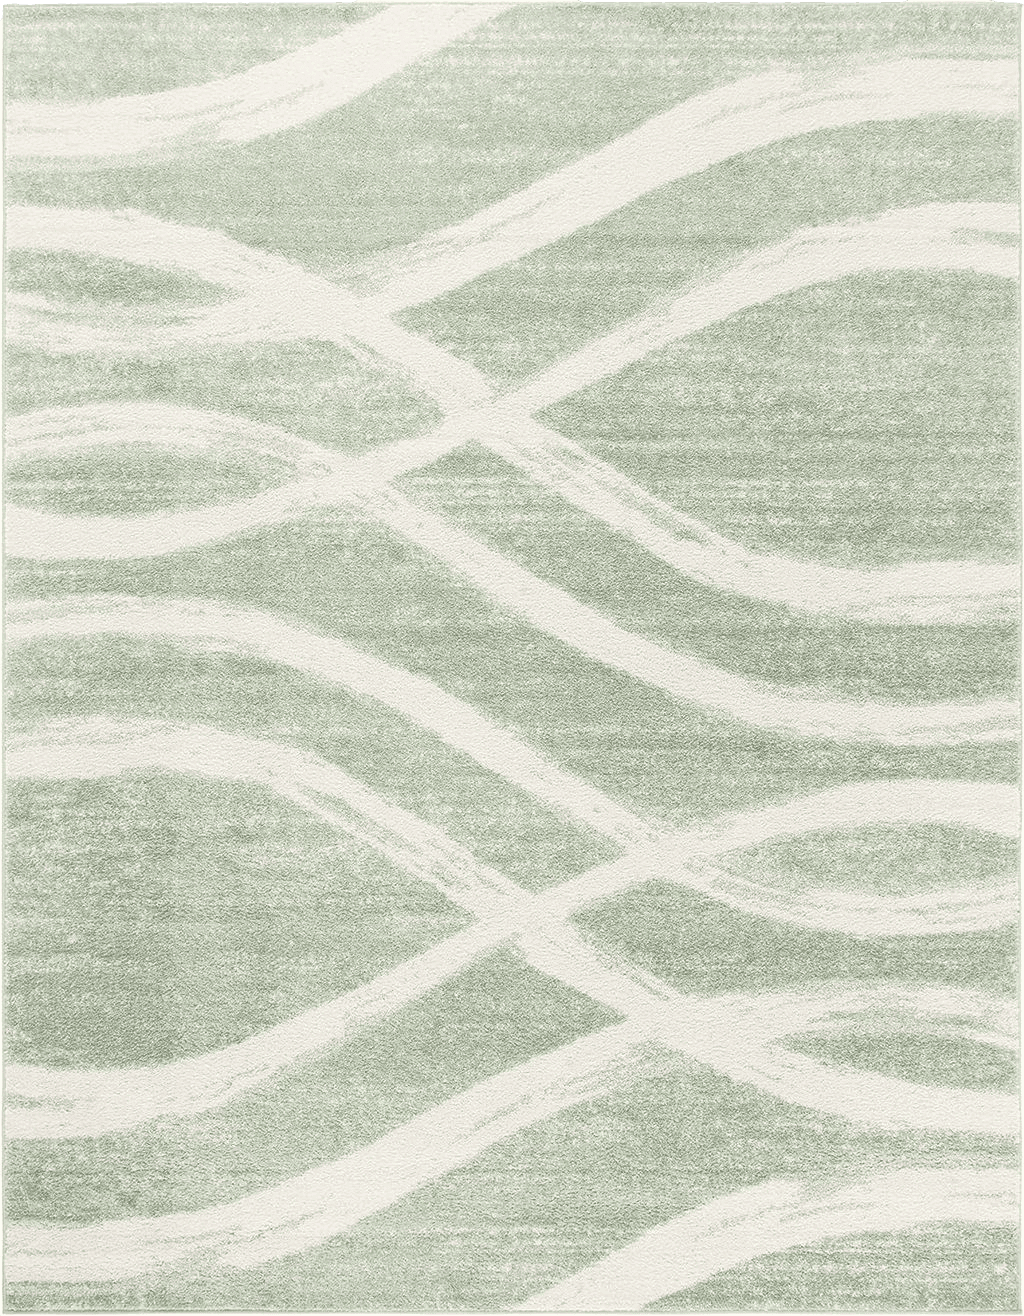 SAFAVIEH Adirondack Collection Area Rug - 8' x 10', Sage & Cream, Modern Wave Distressed Design, Non-Shedding & Easy Care, Ideal for High Traffic Areas in Living Room, Bedroom (ADR125X)